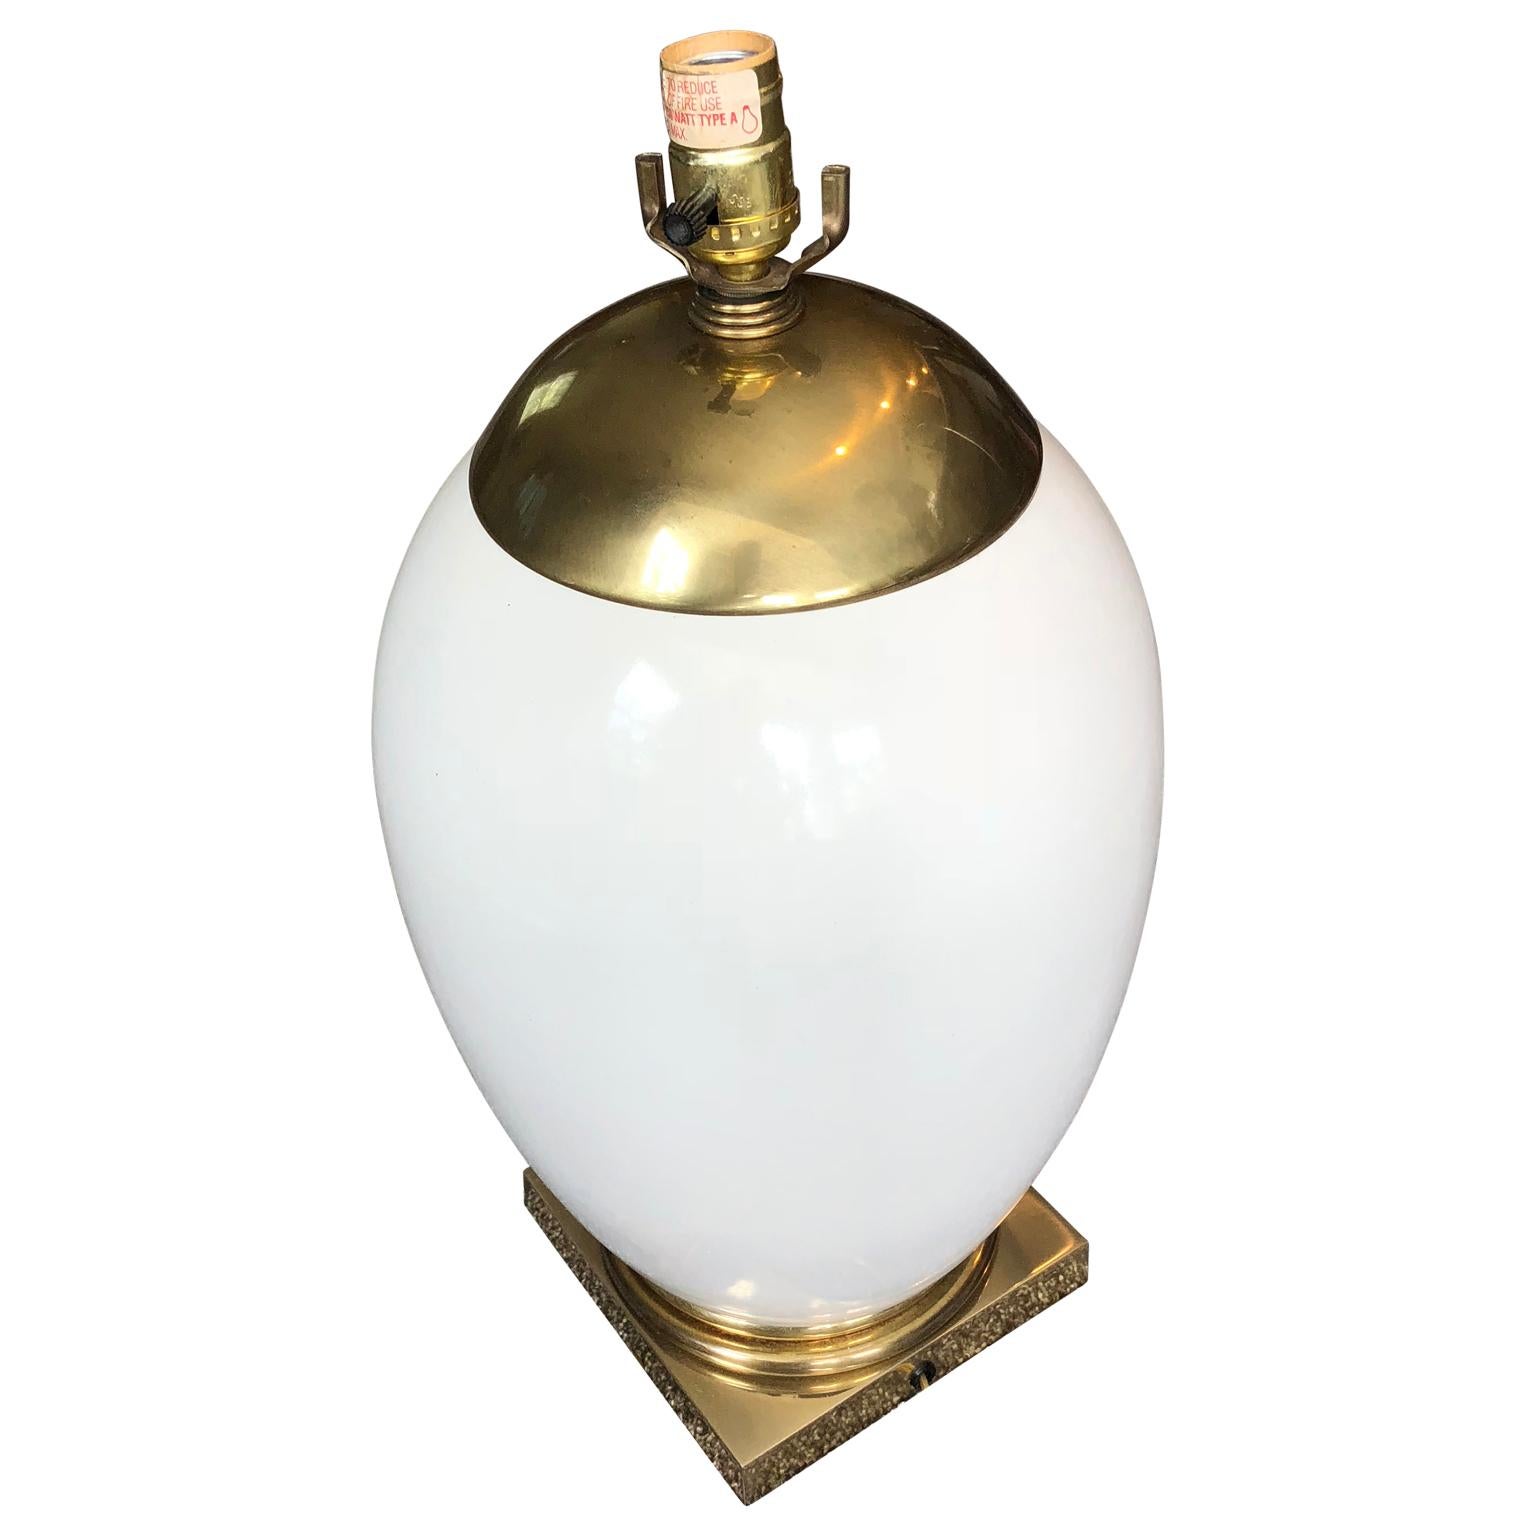 Mid-Century Modern Ellipse shaped enamel and brass table lamp. Lamp is newly re-wired. This large lamp is timeless in it's design; it easily fits into any decor style in any room of your home. The solid white body is accented with brass top and